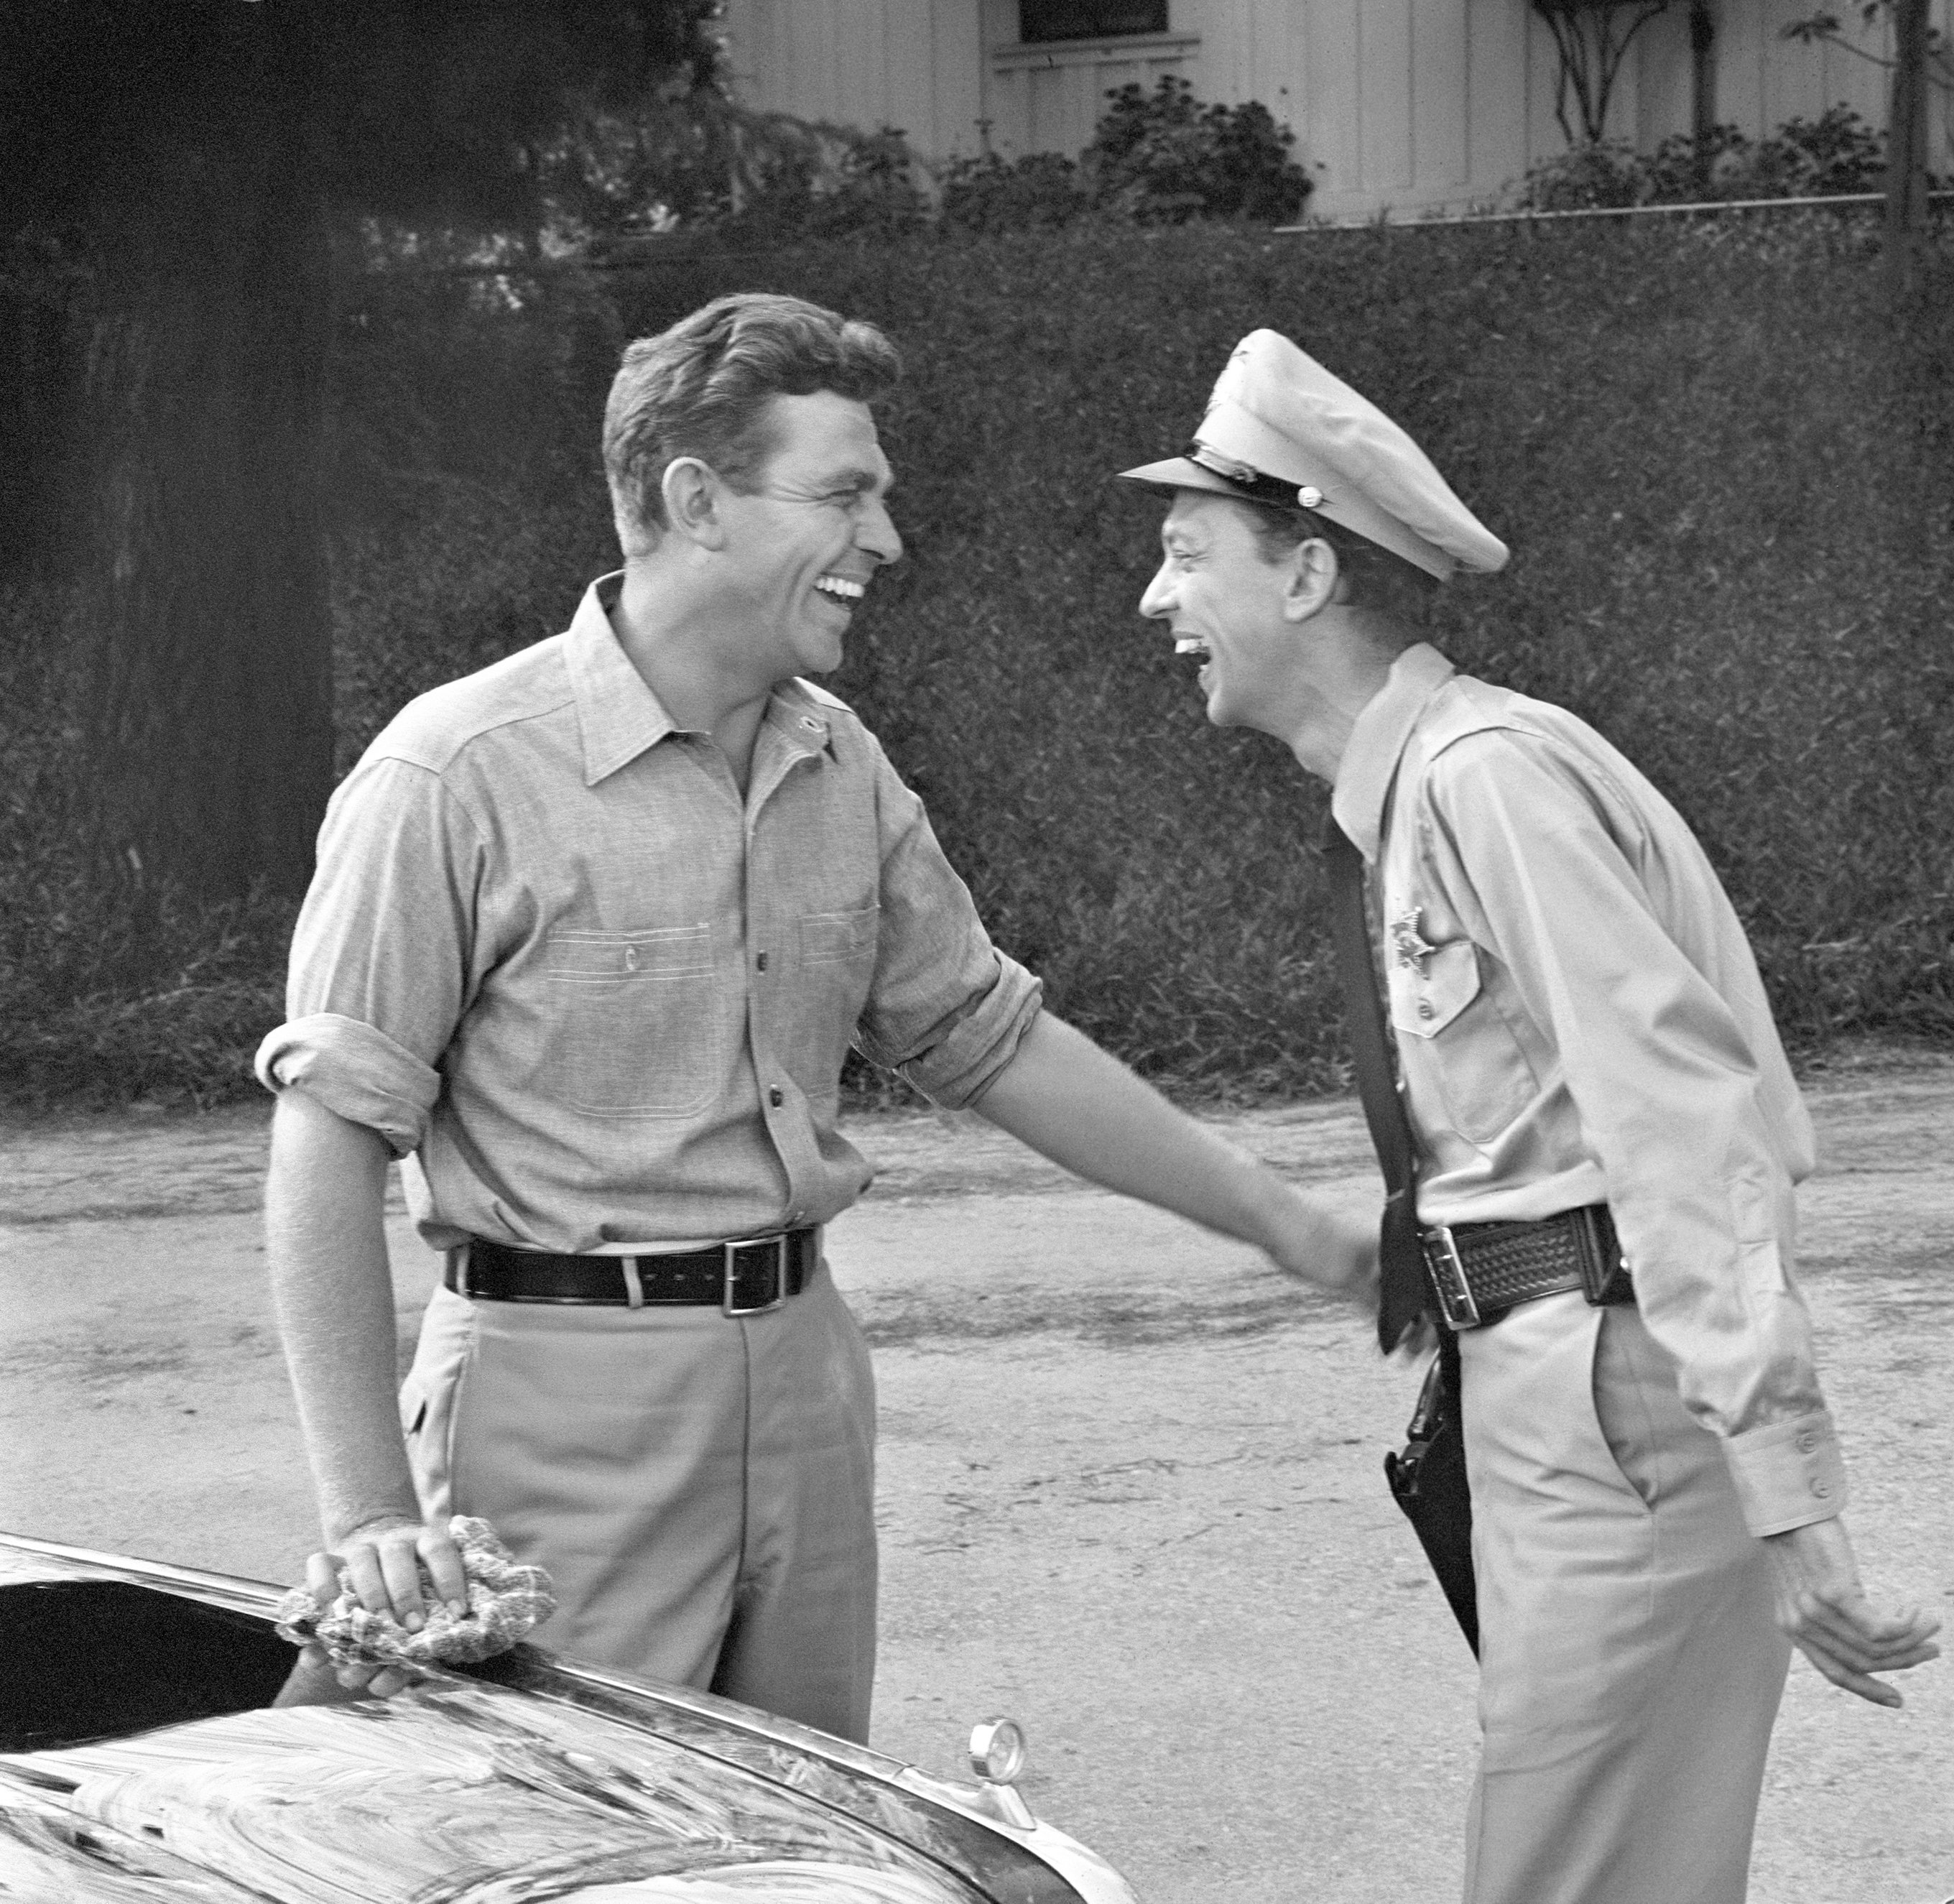 Andy Griffith and Don Knotts dressed as police officers